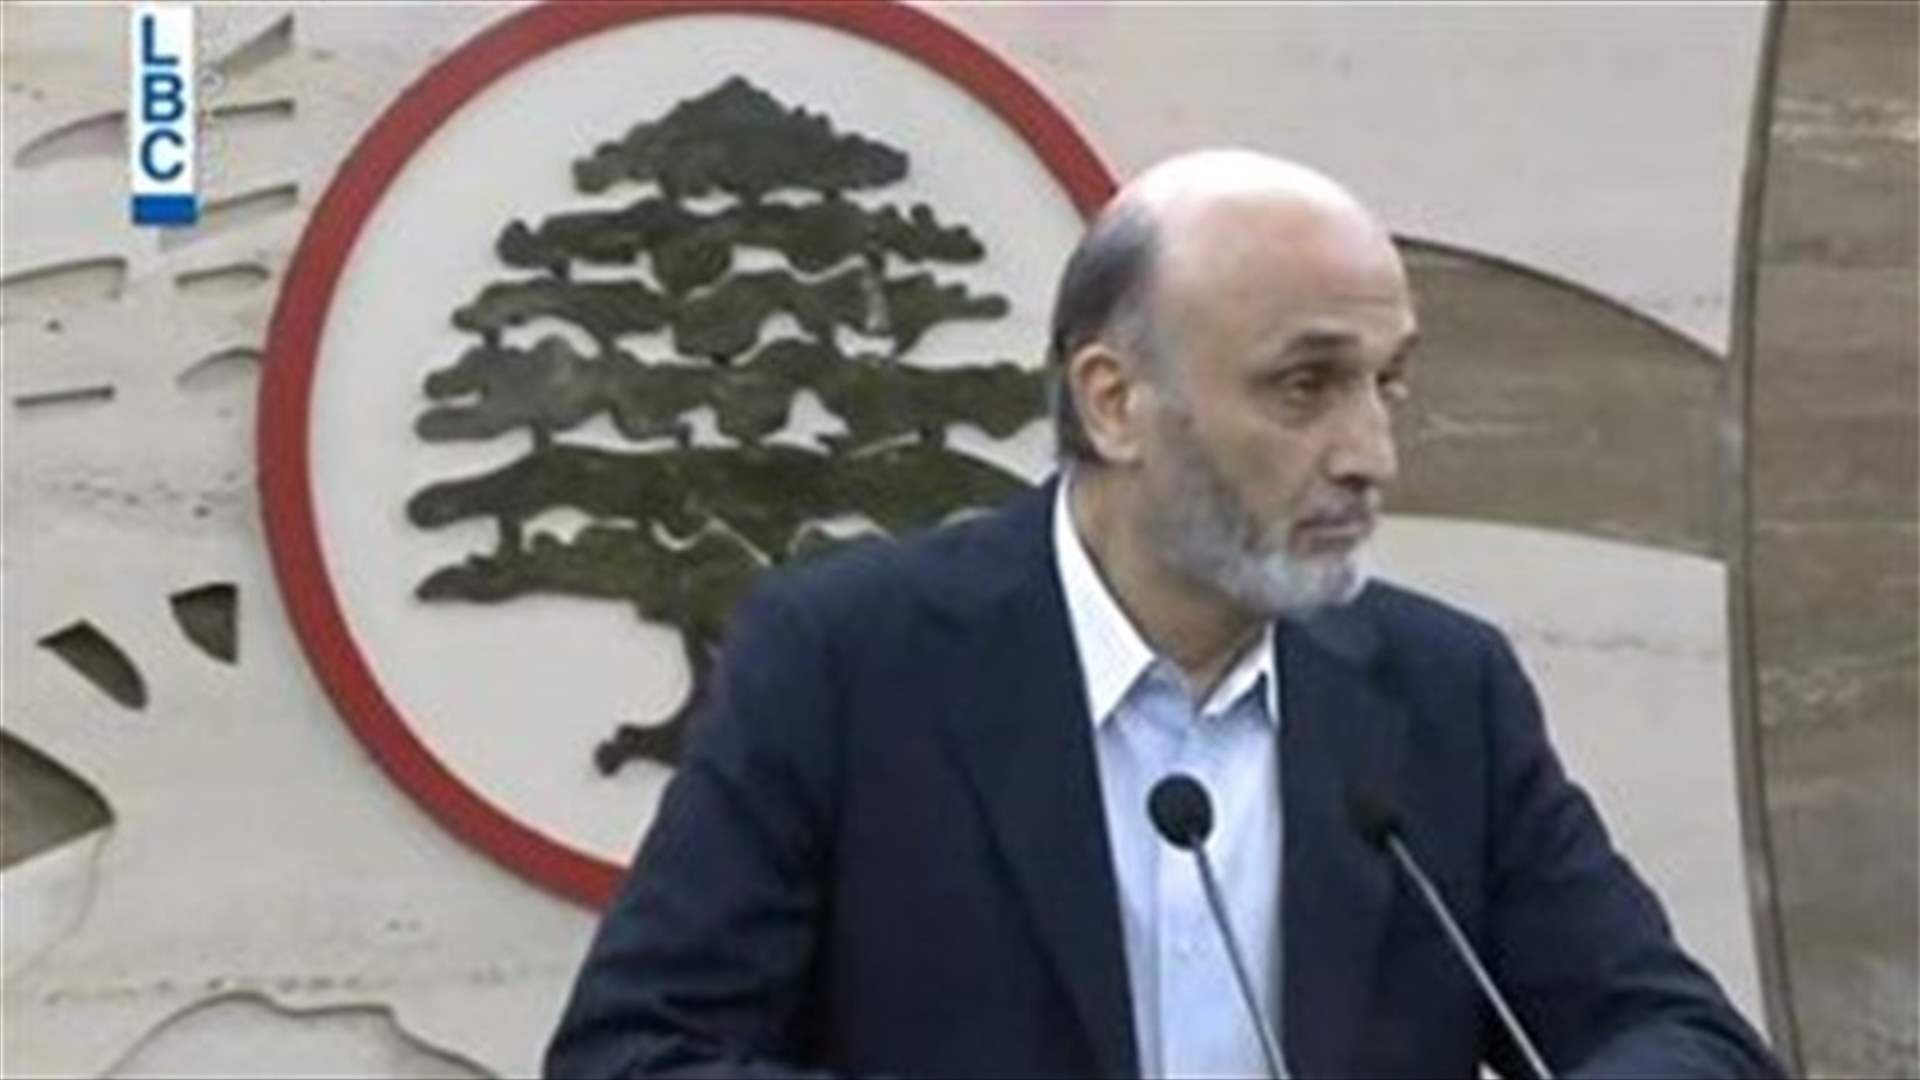 Geagea: Solution relies in formation of a government made of independent experts